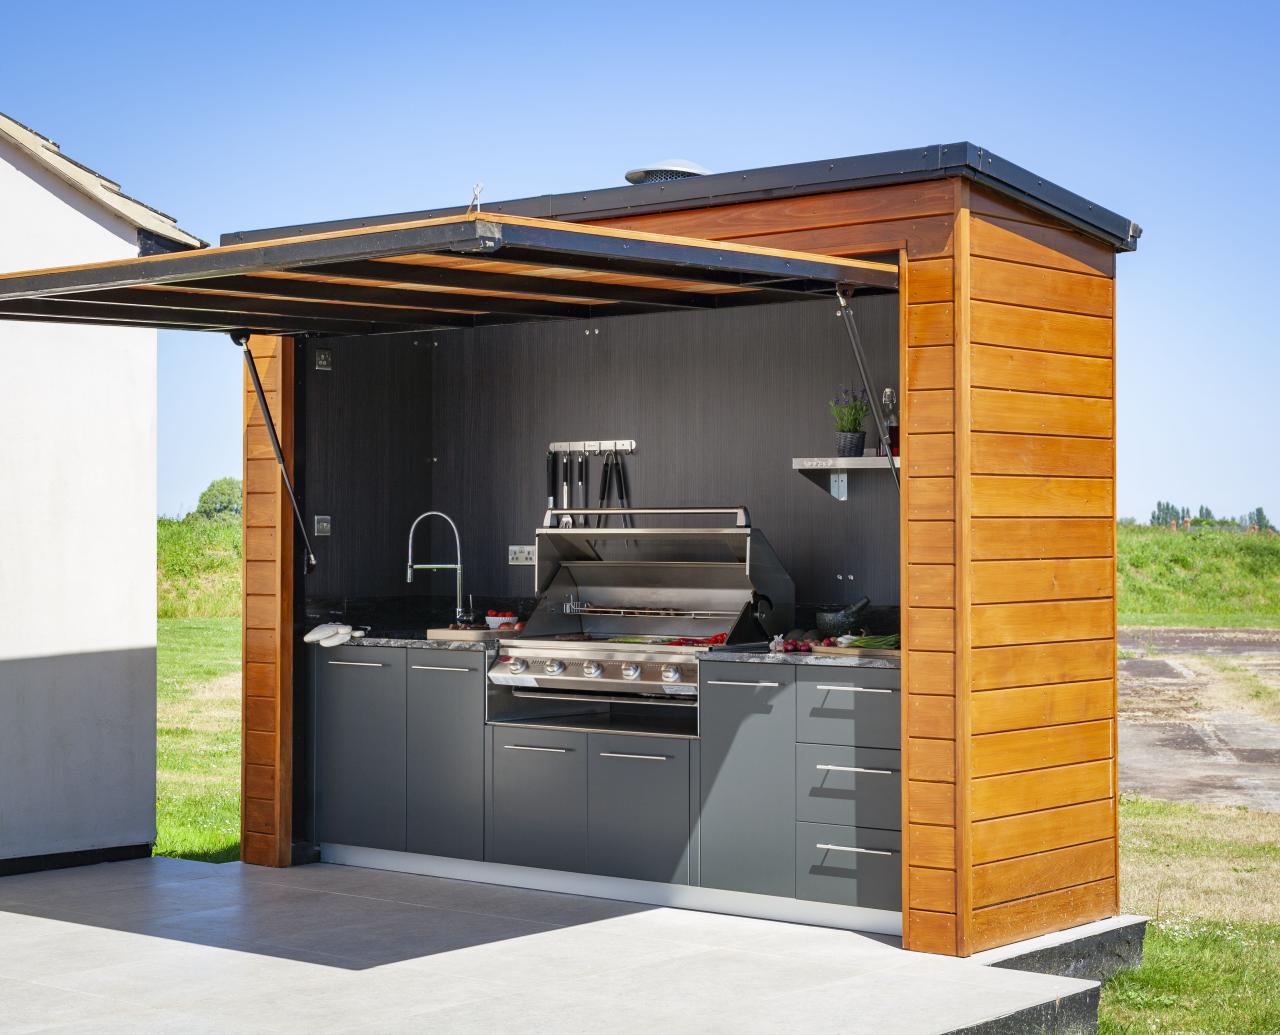 27 Outdoor Kitchen Ideas – Diy, Modular And Small Space Designs For All  Backyards | Build Outdoor Kitchen, Small Outdoor Kitchens, Outdoor Bbq  Kitchen